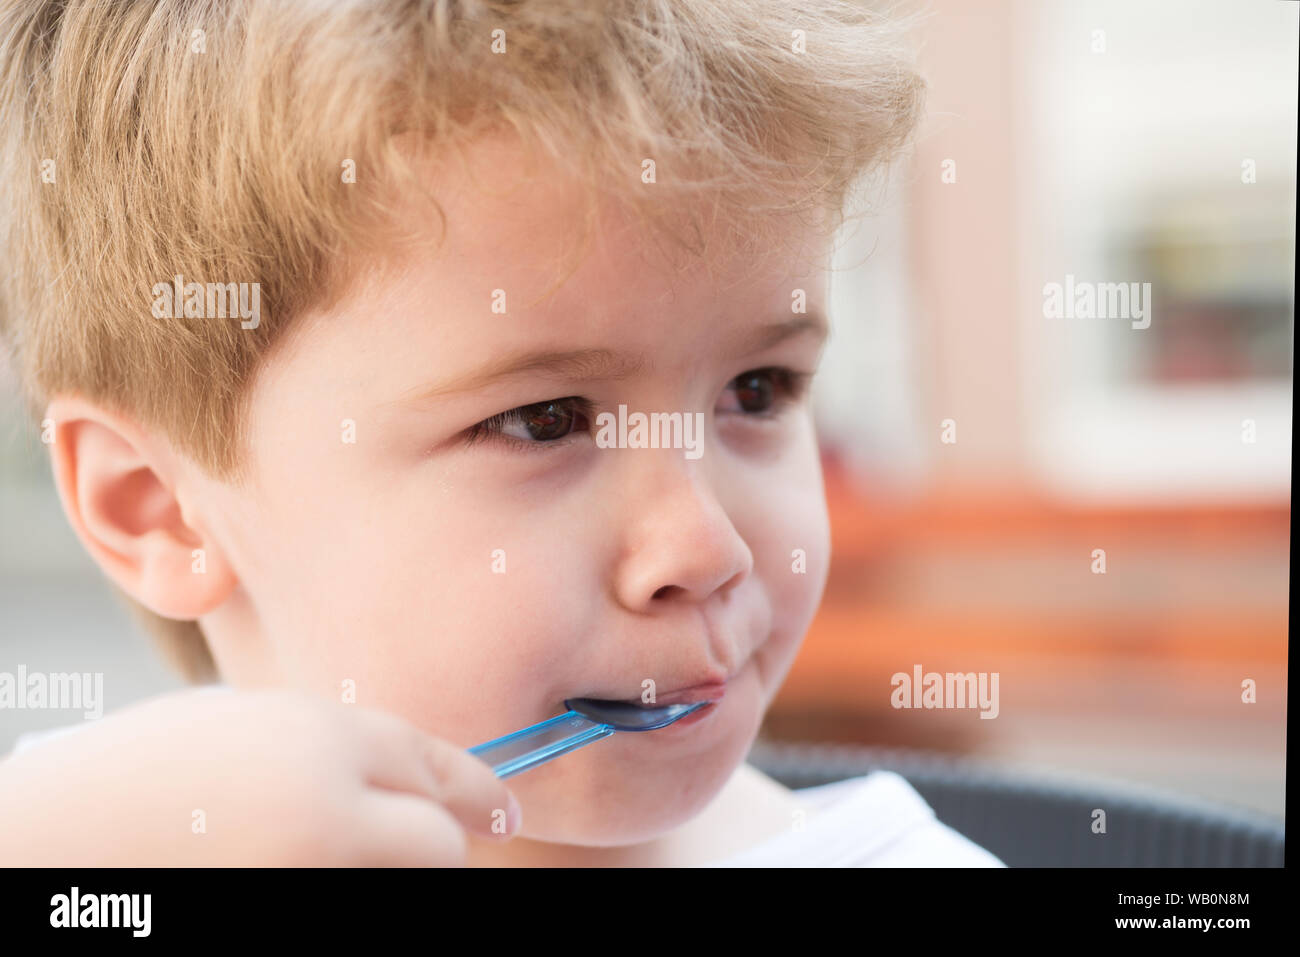 Kids haircut with style. Little child with short blond hair. Healthy hair  care habits. Little child eating outdoor. Small boy with stylish haircut.  Ta Stock Photo - Alamy